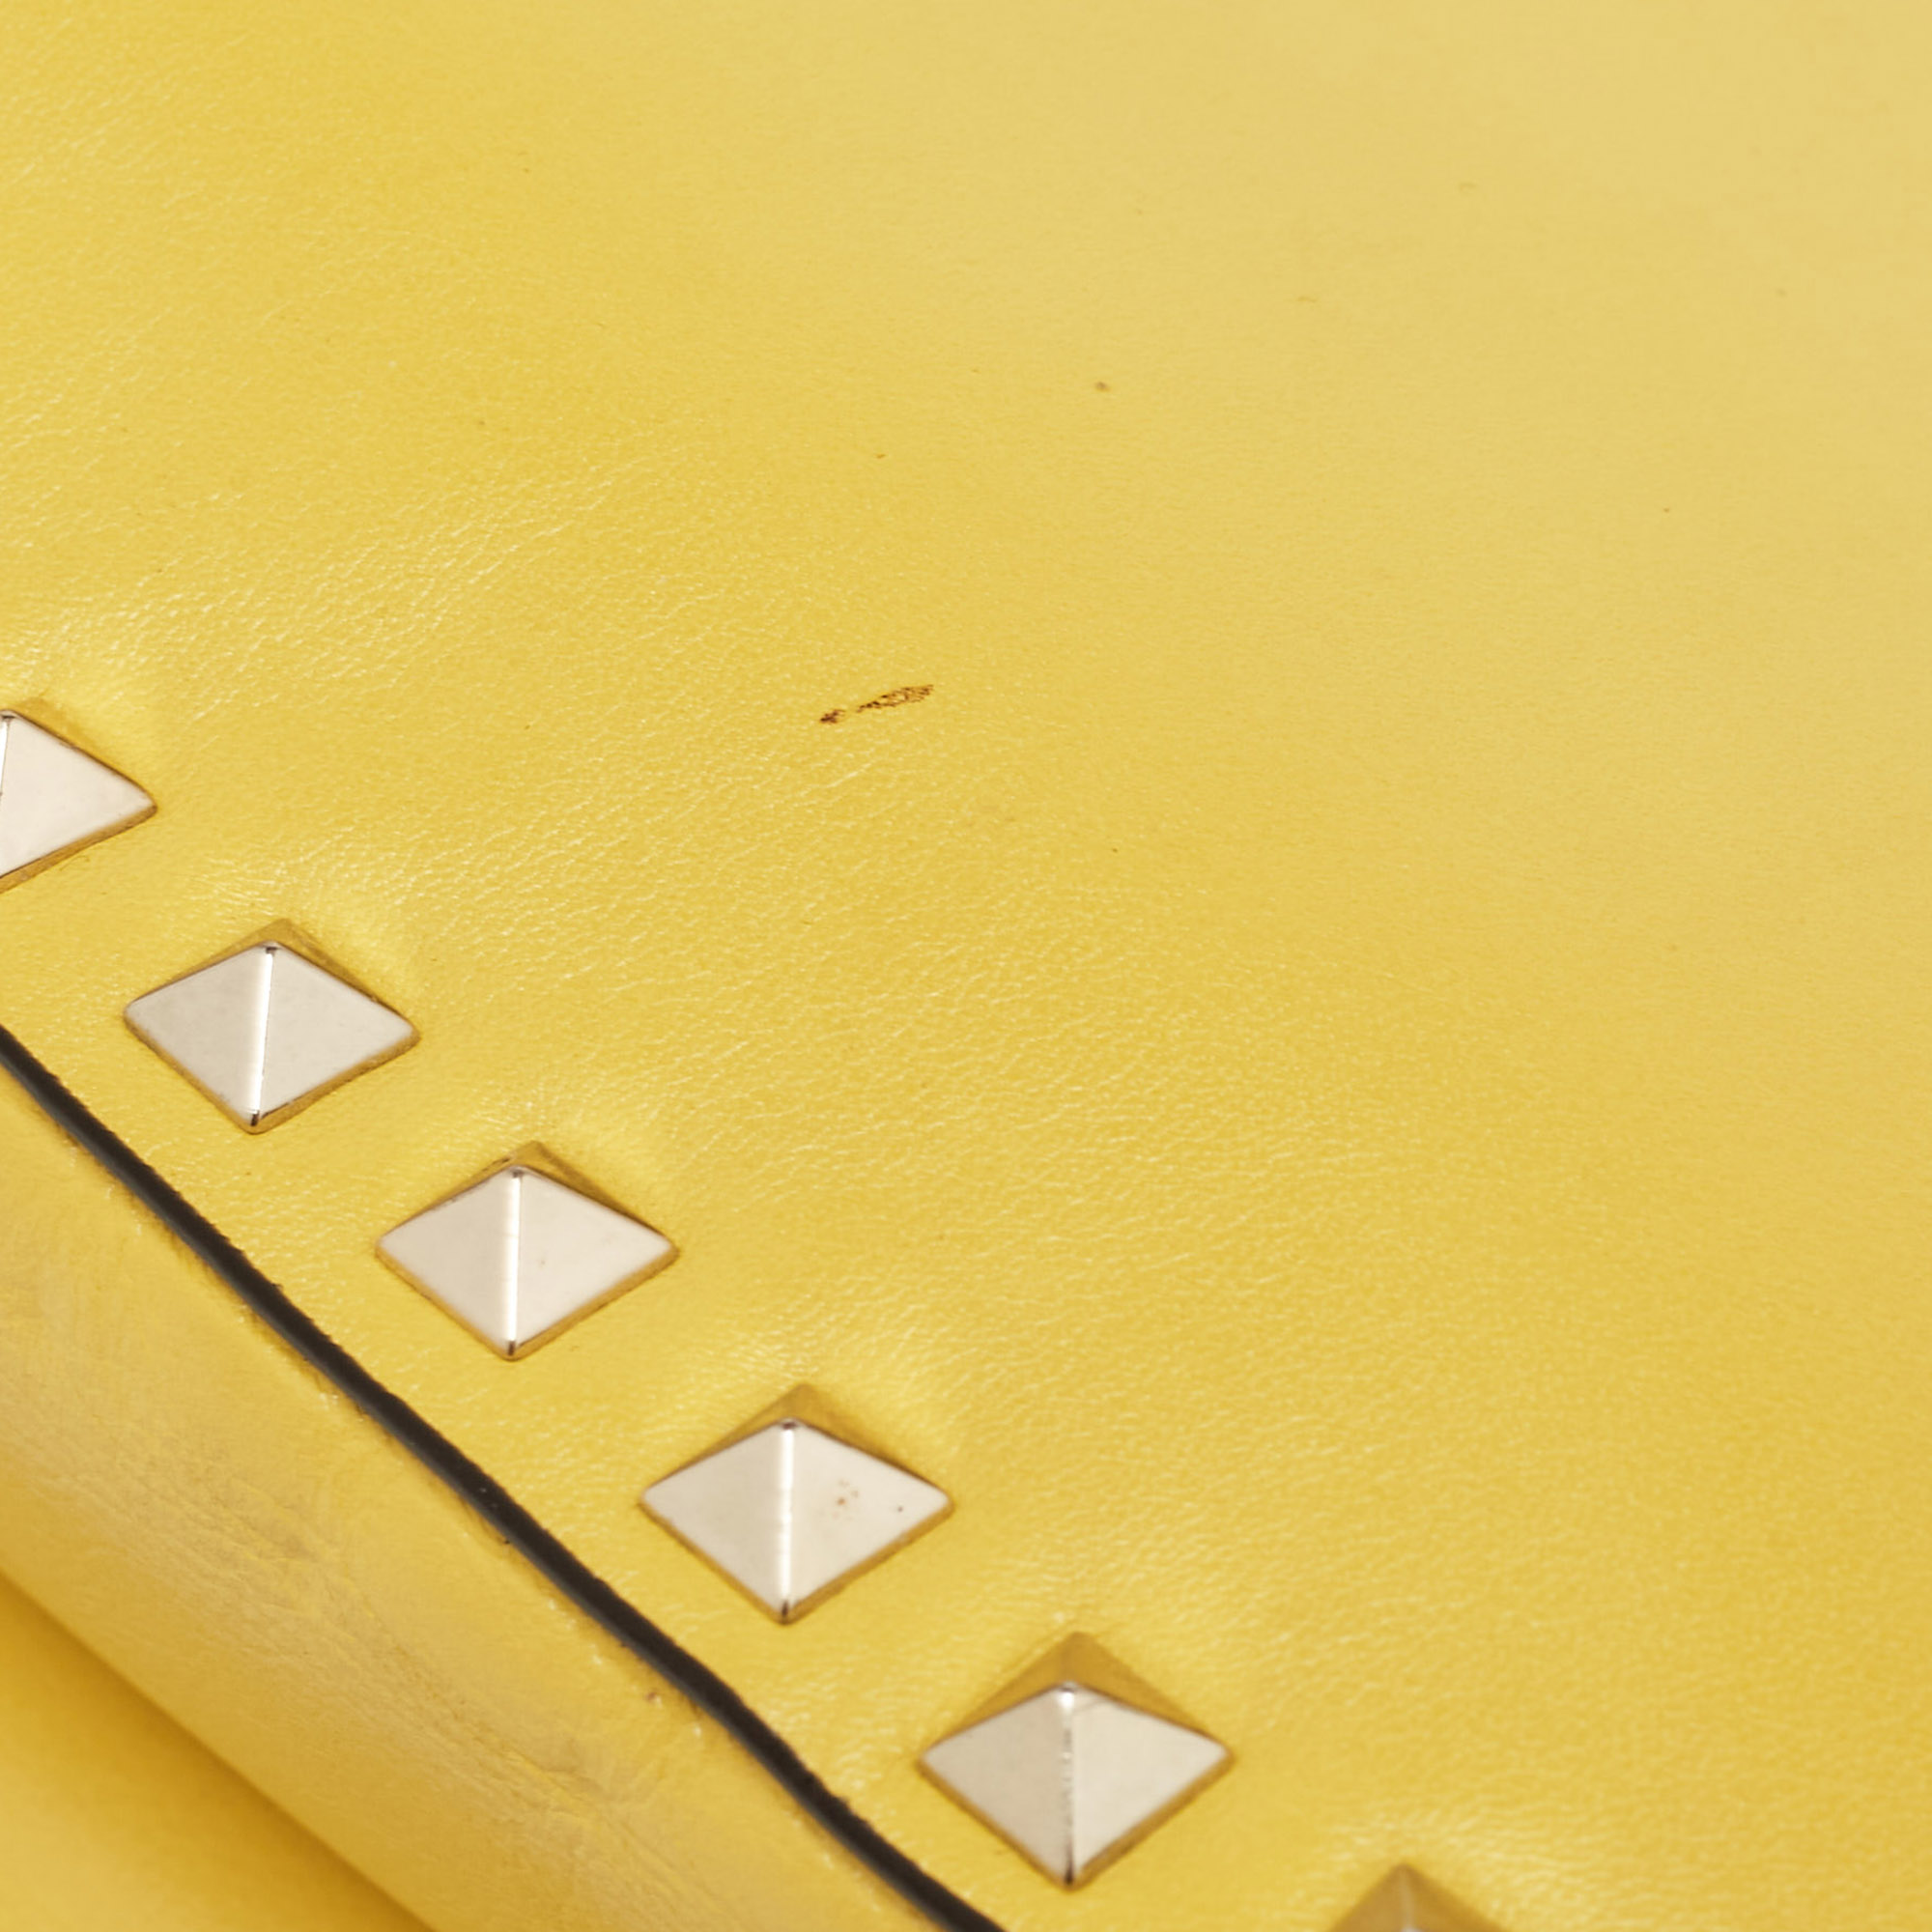 Valentino Yellow Leather Rockstud Trapeze Shoulder Bag